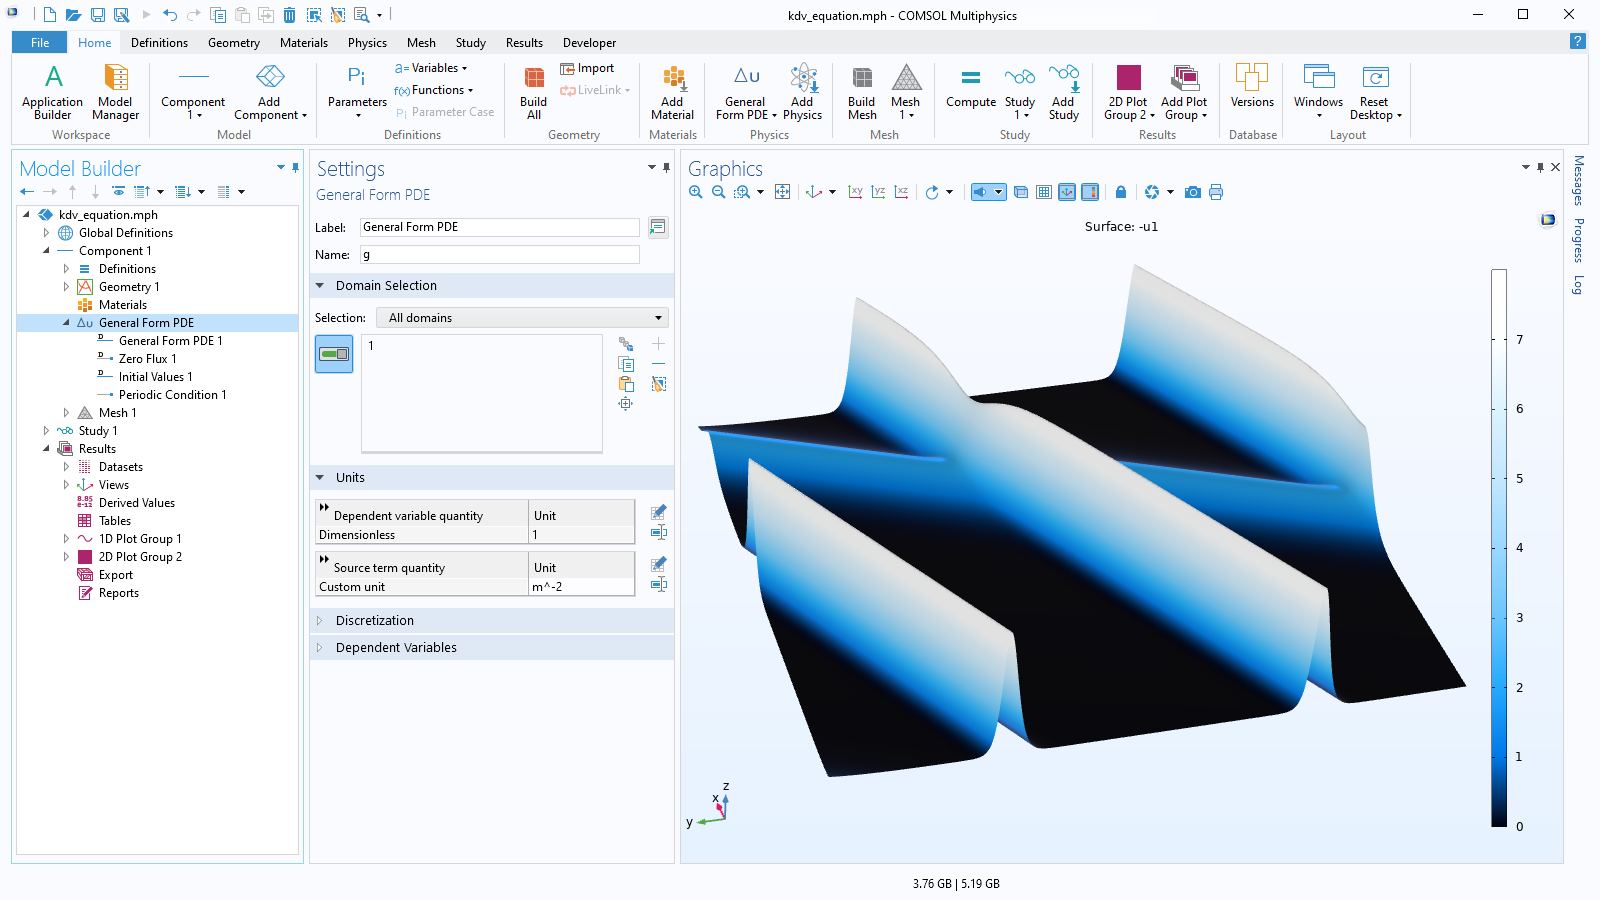 The COMSOL Multiphysics UI showing the Model Builder with the General Form PDE node highlighted, the corresponding Settings window, and the results of a soliton collision in the Graphics window.